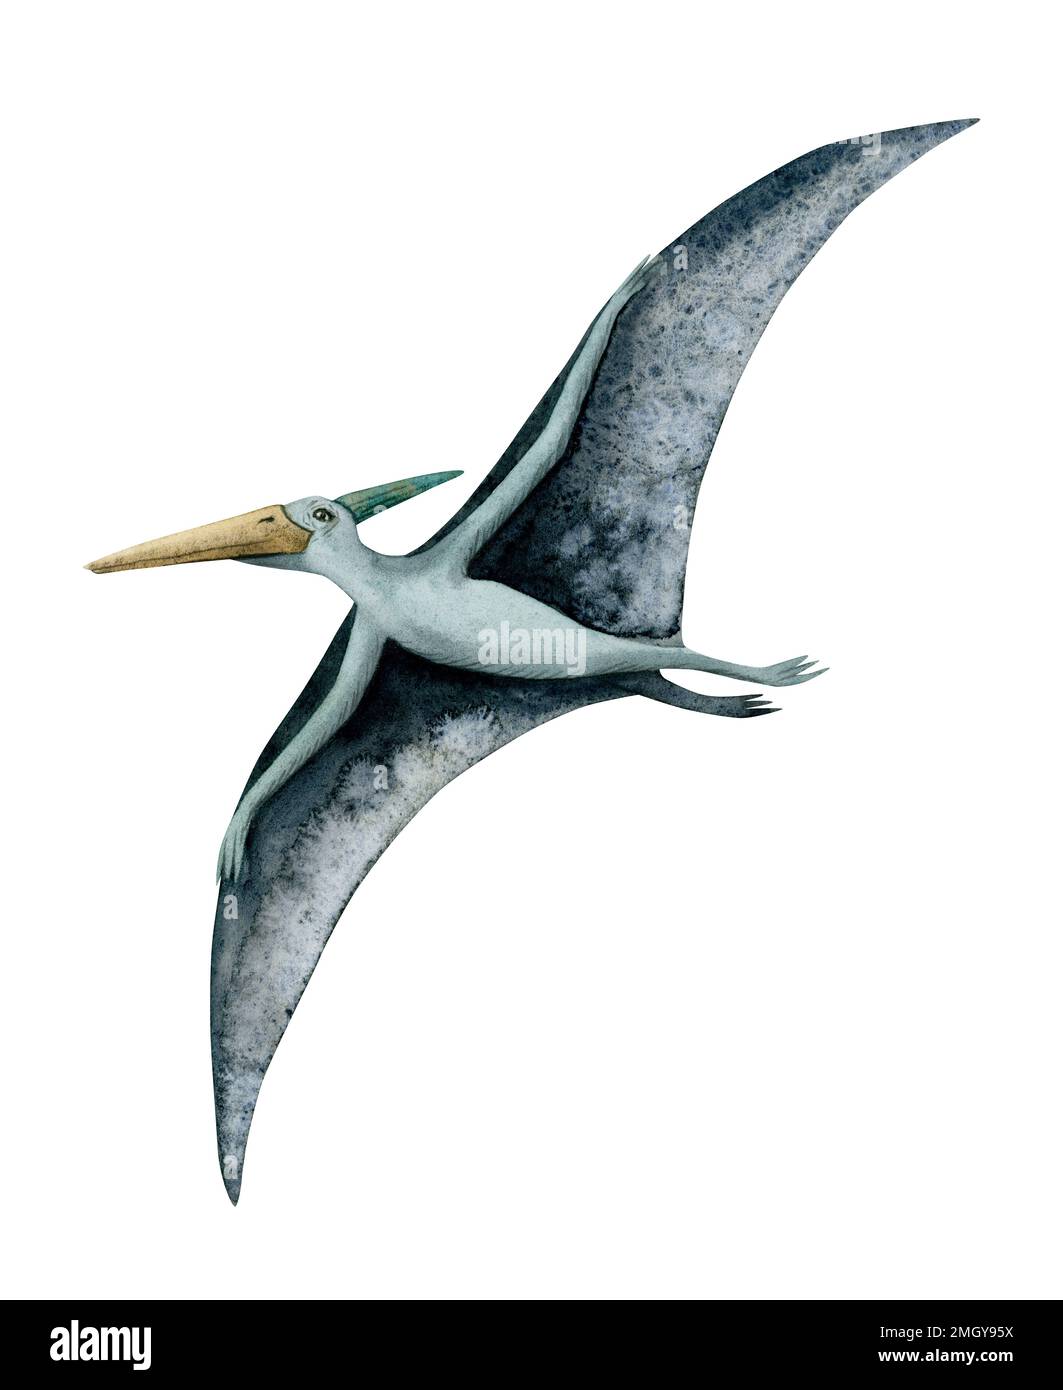 Blue watercolor flying pterodactyl. Hand drawn pterosaur with wide wings from dinosaur era isolated on white background. Stock Photo